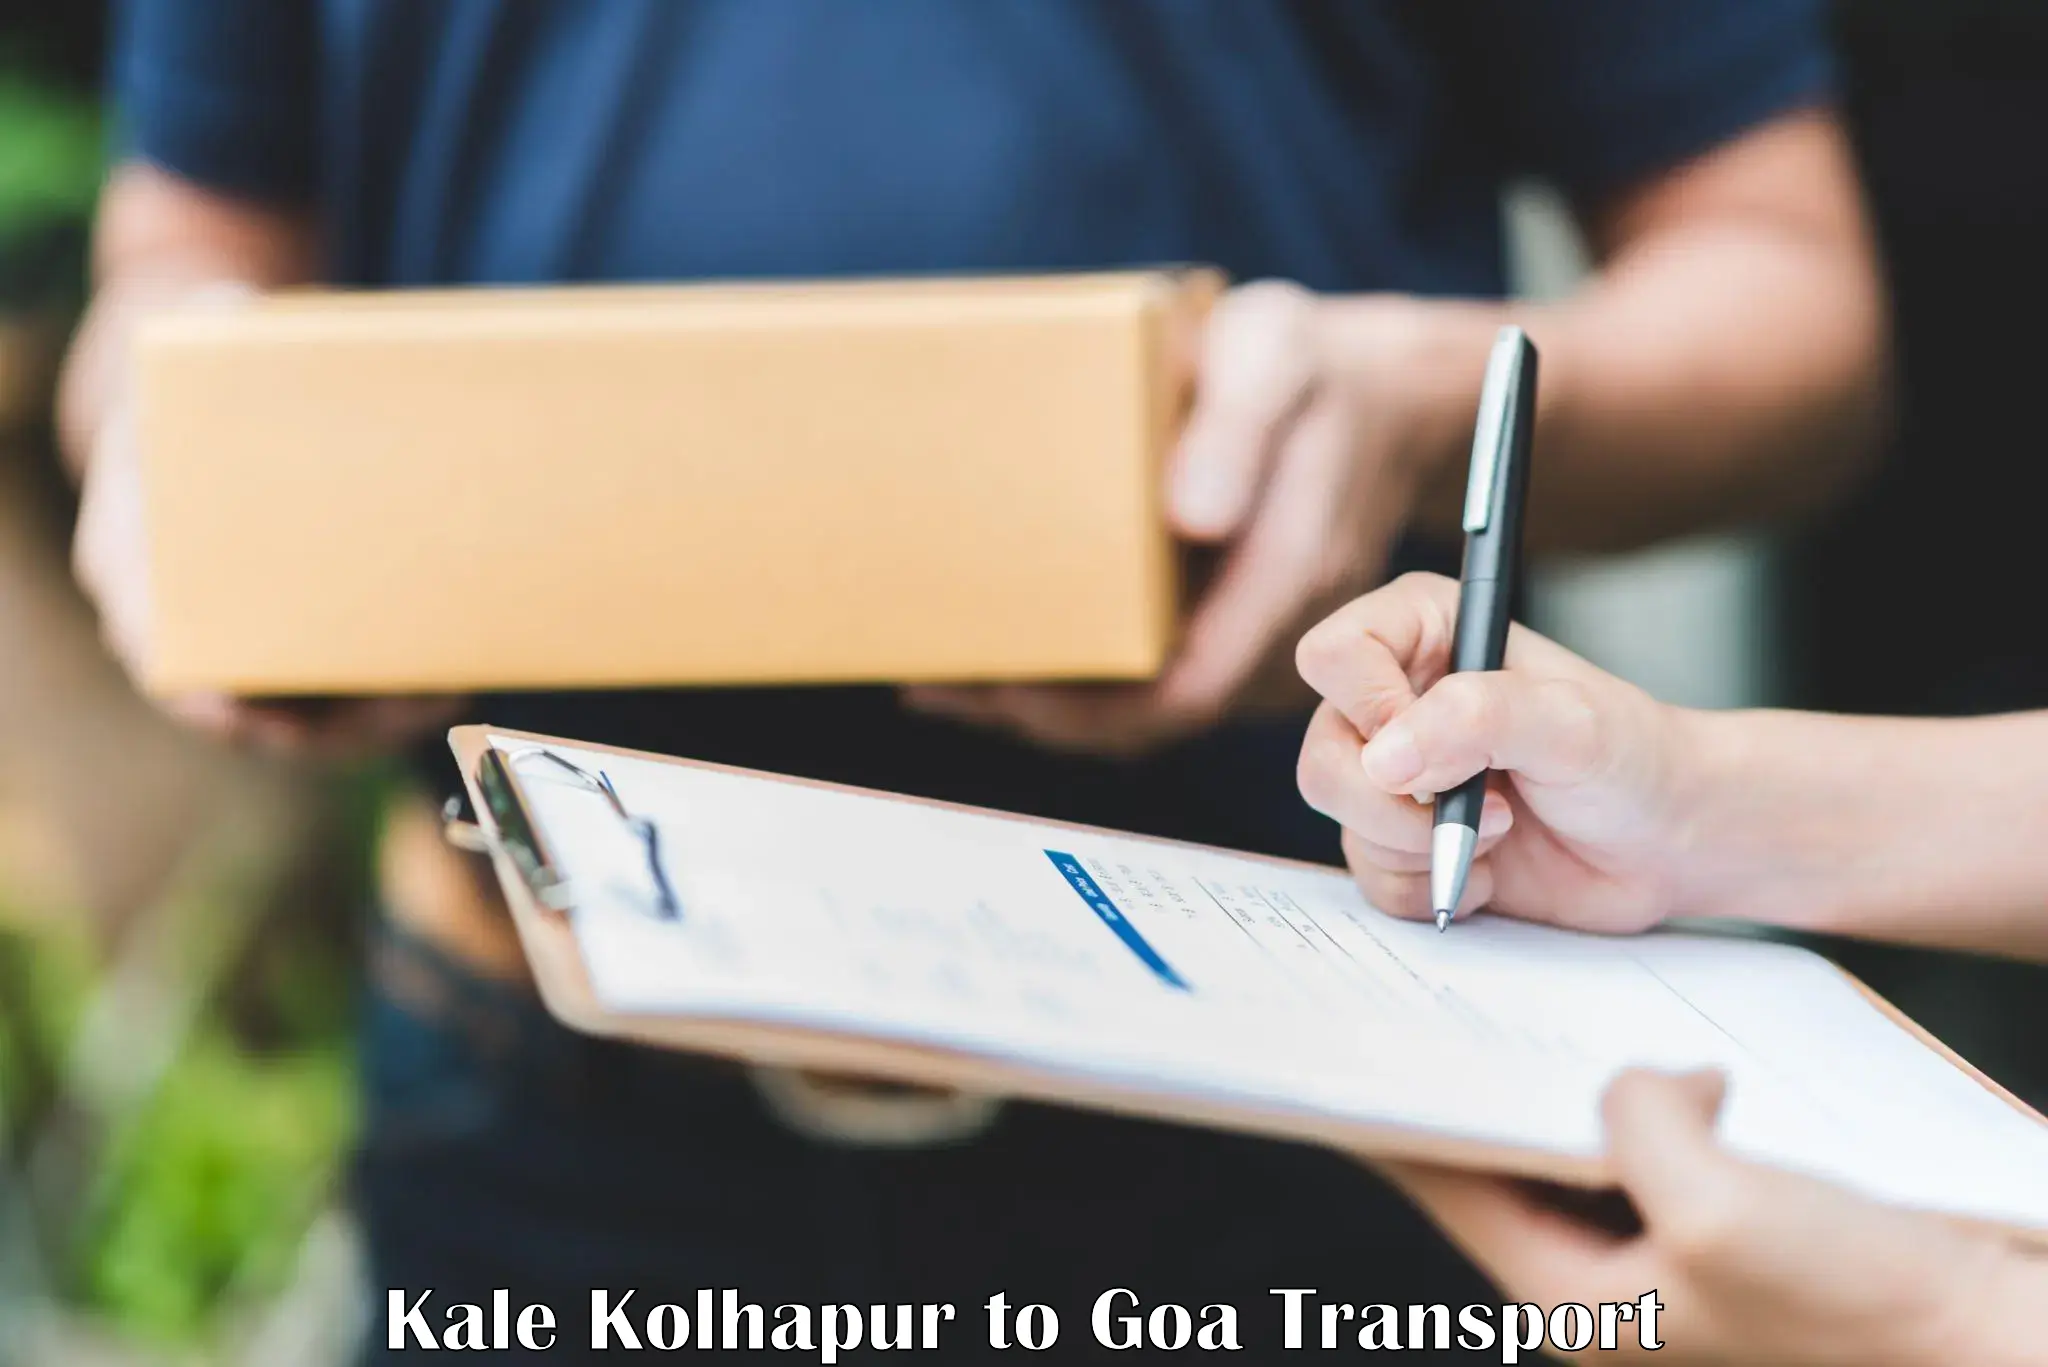 Container transport service Kale Kolhapur to Goa